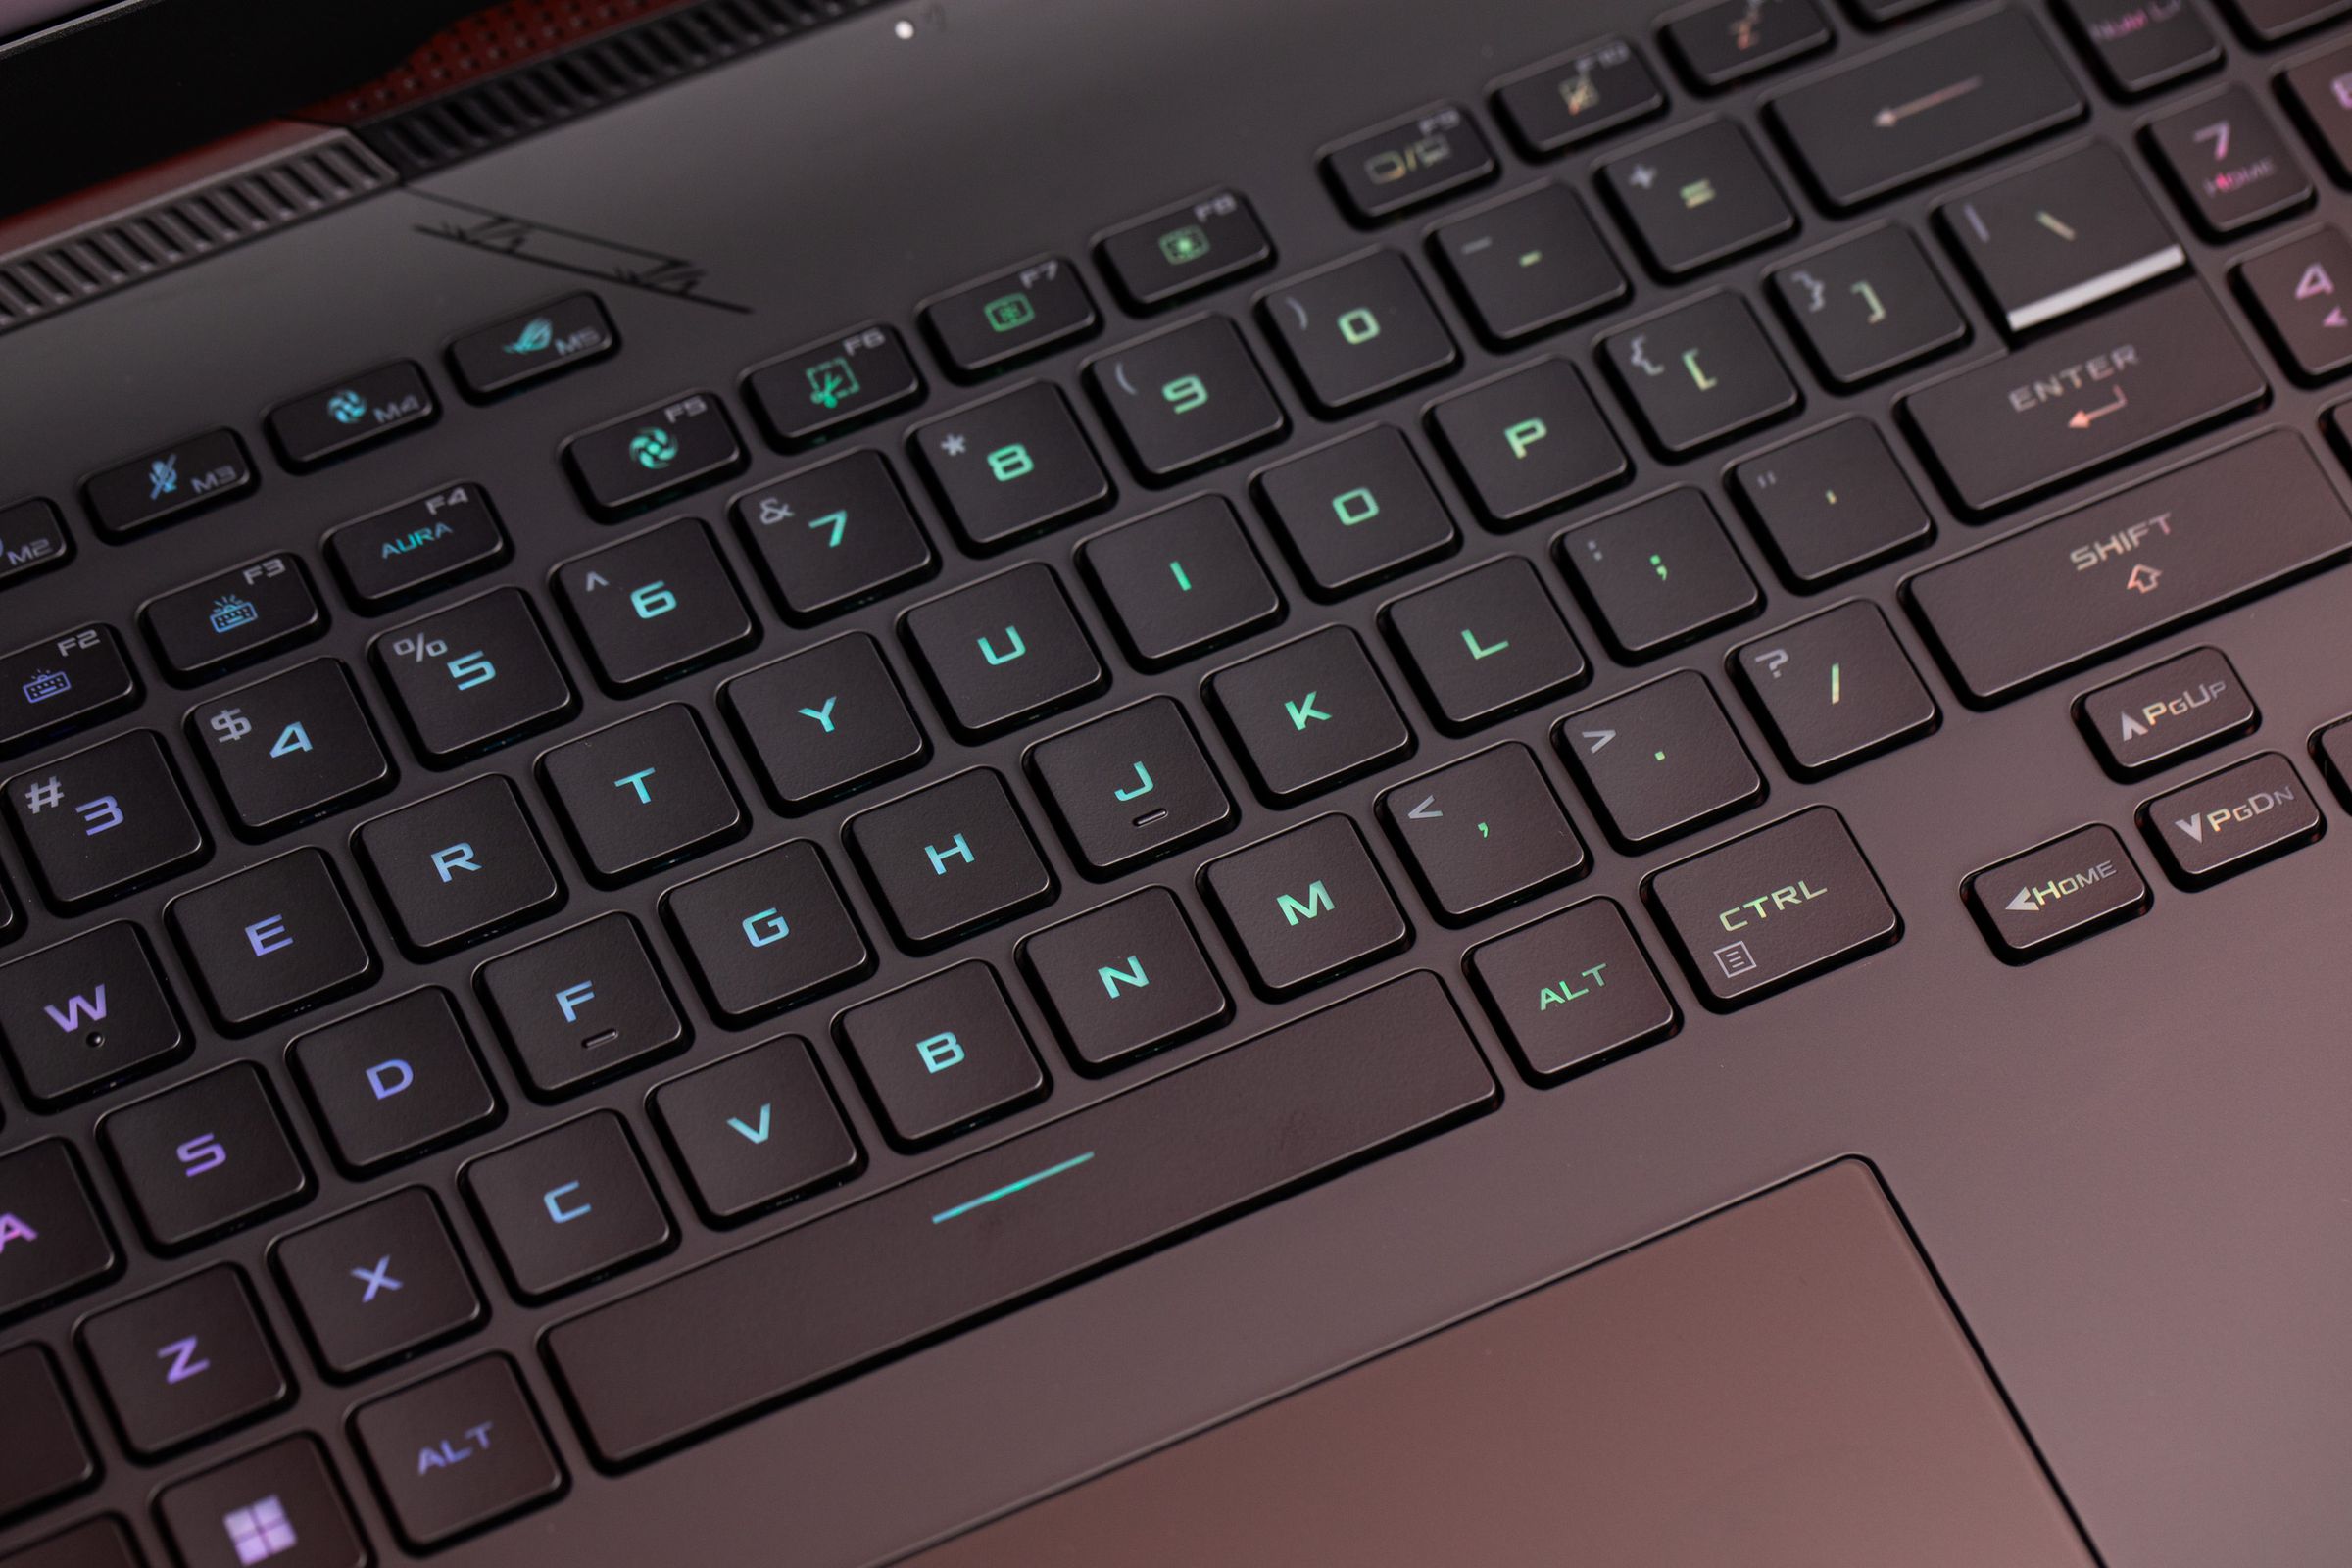 The center of the Asus ROG Strix Scar 17 keyboard.